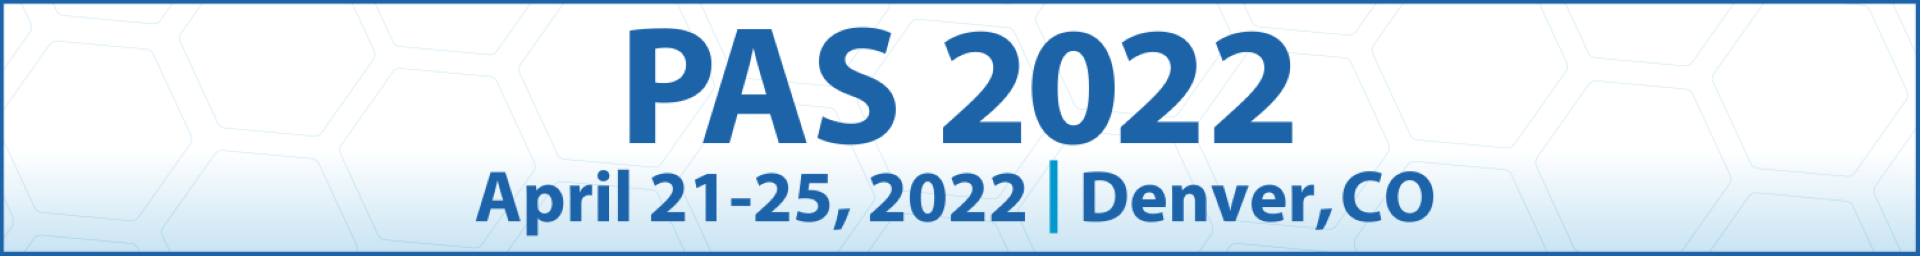 PAS 2023 Meeting Event Banner